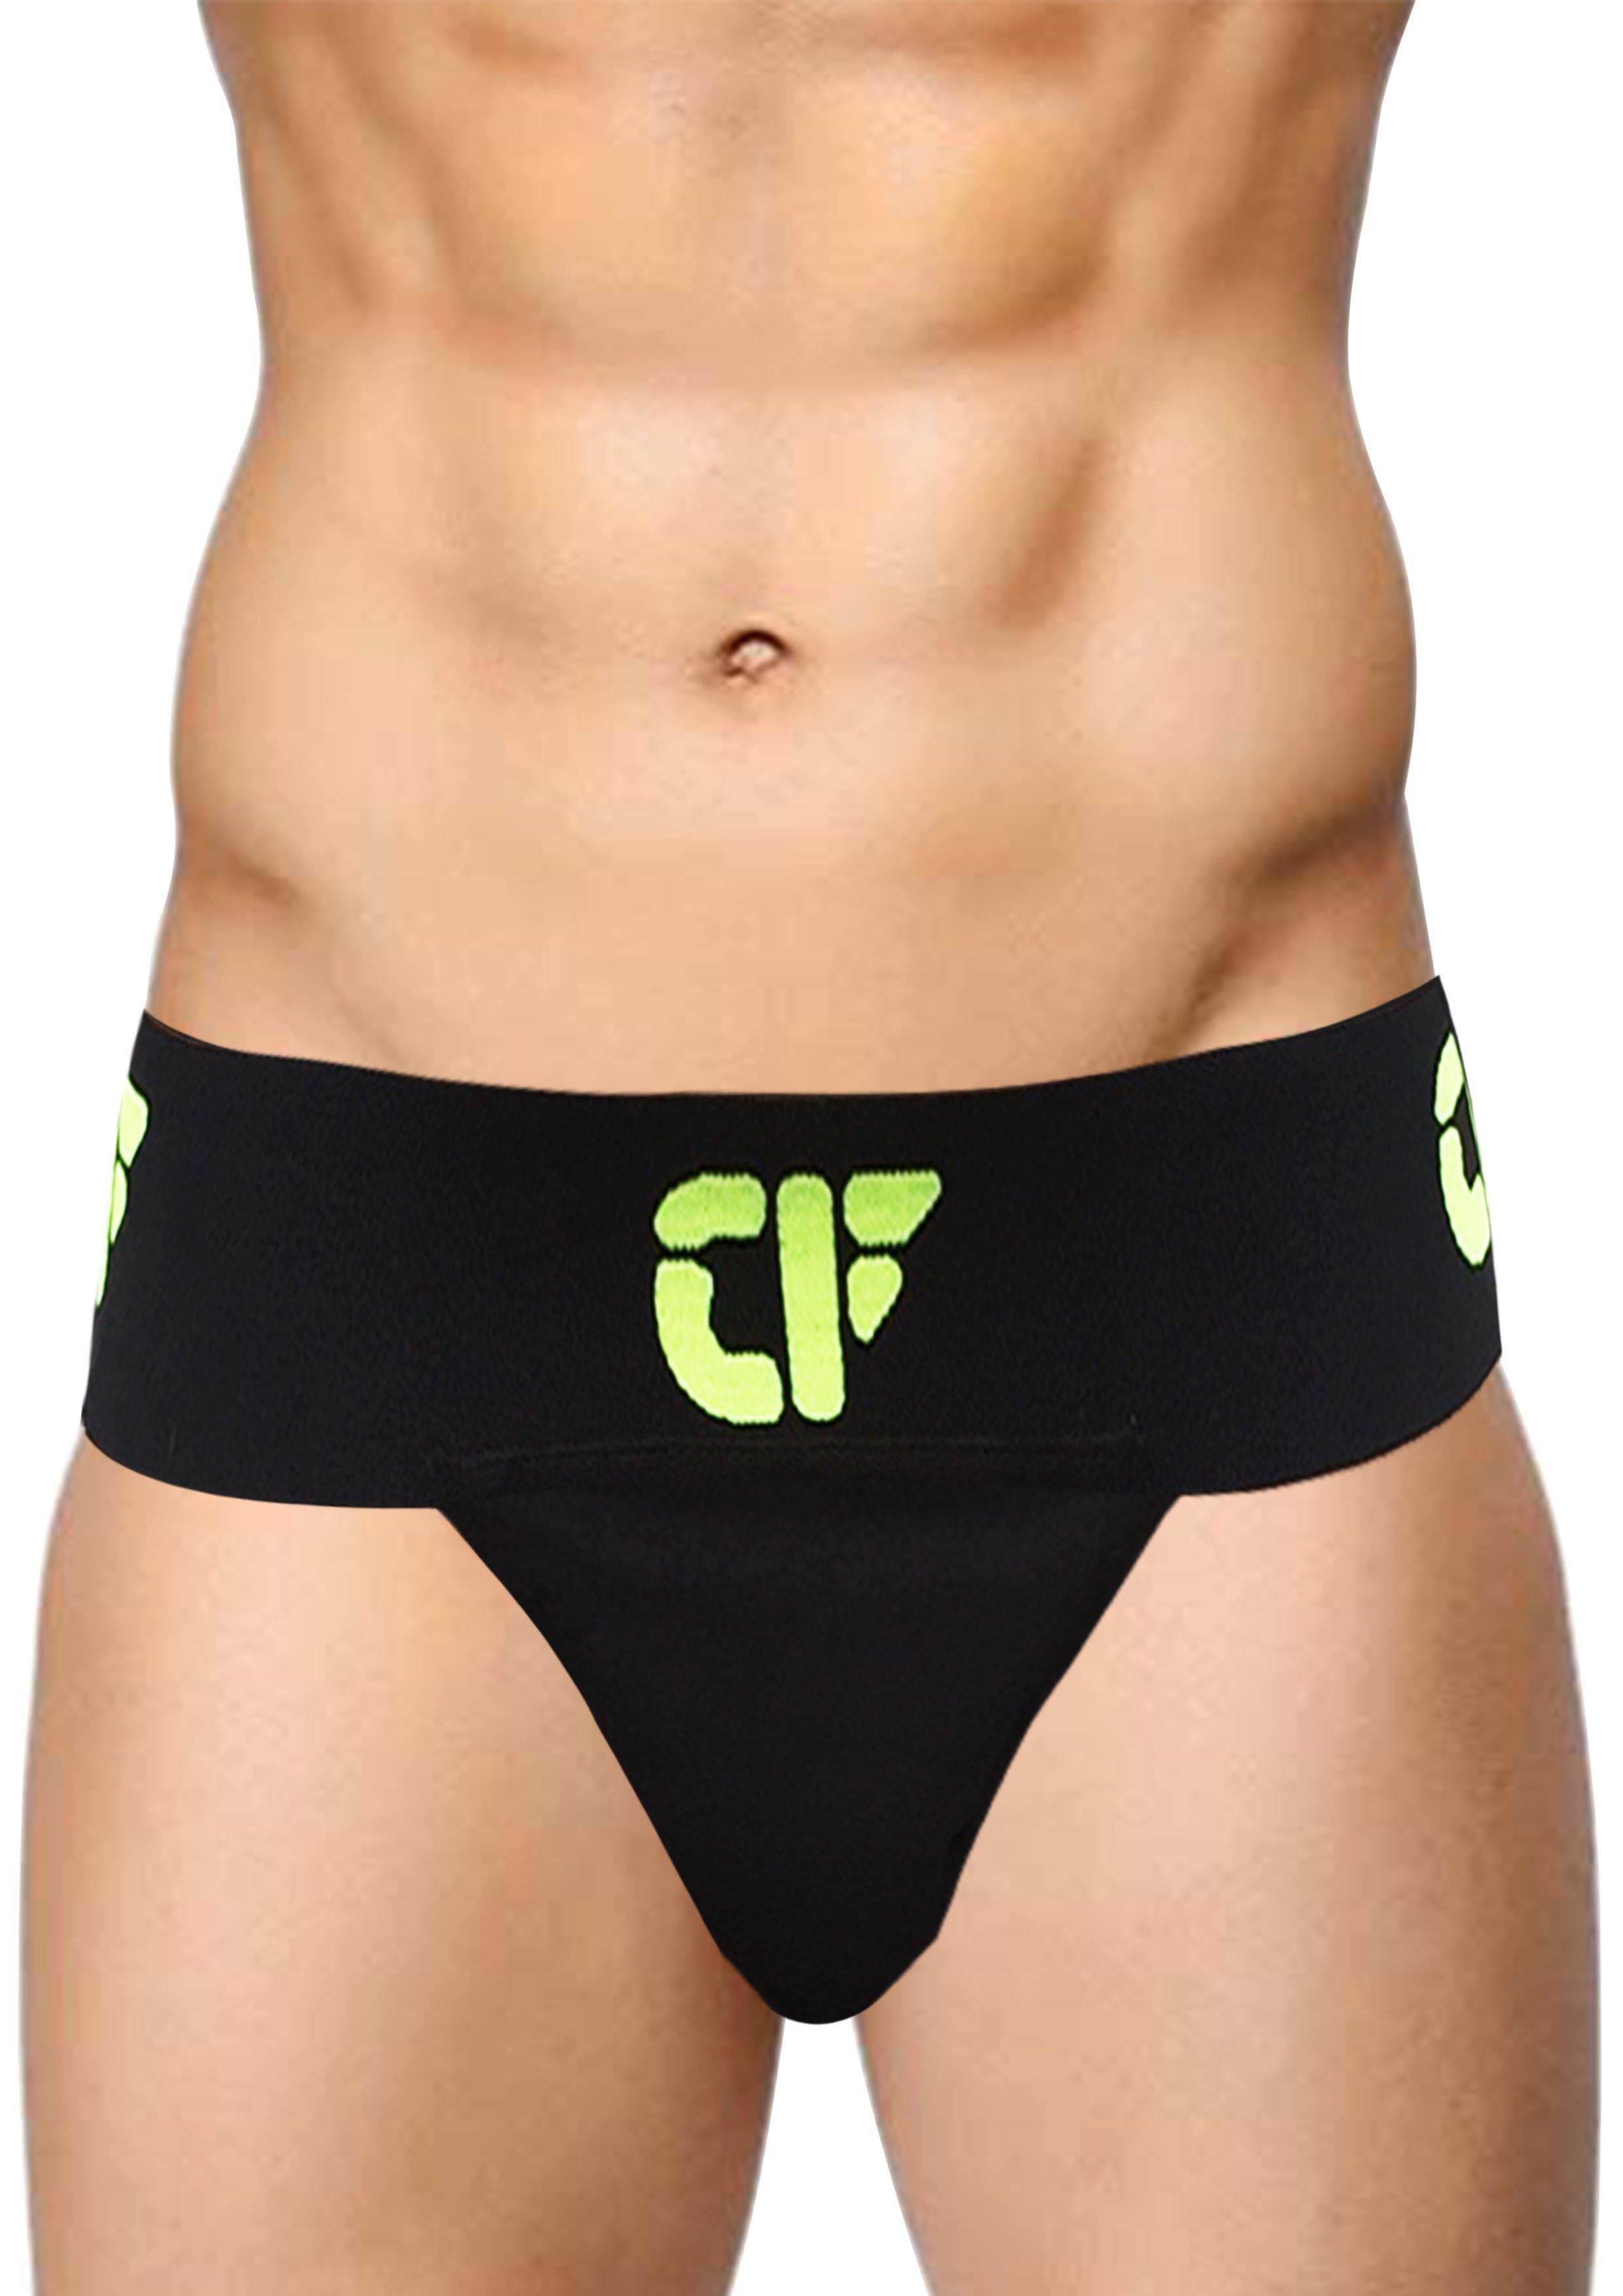 Champs fighter Back Cover Nexa Gym Cotton Sports underwear at Rs 299.00, Sports Underwear